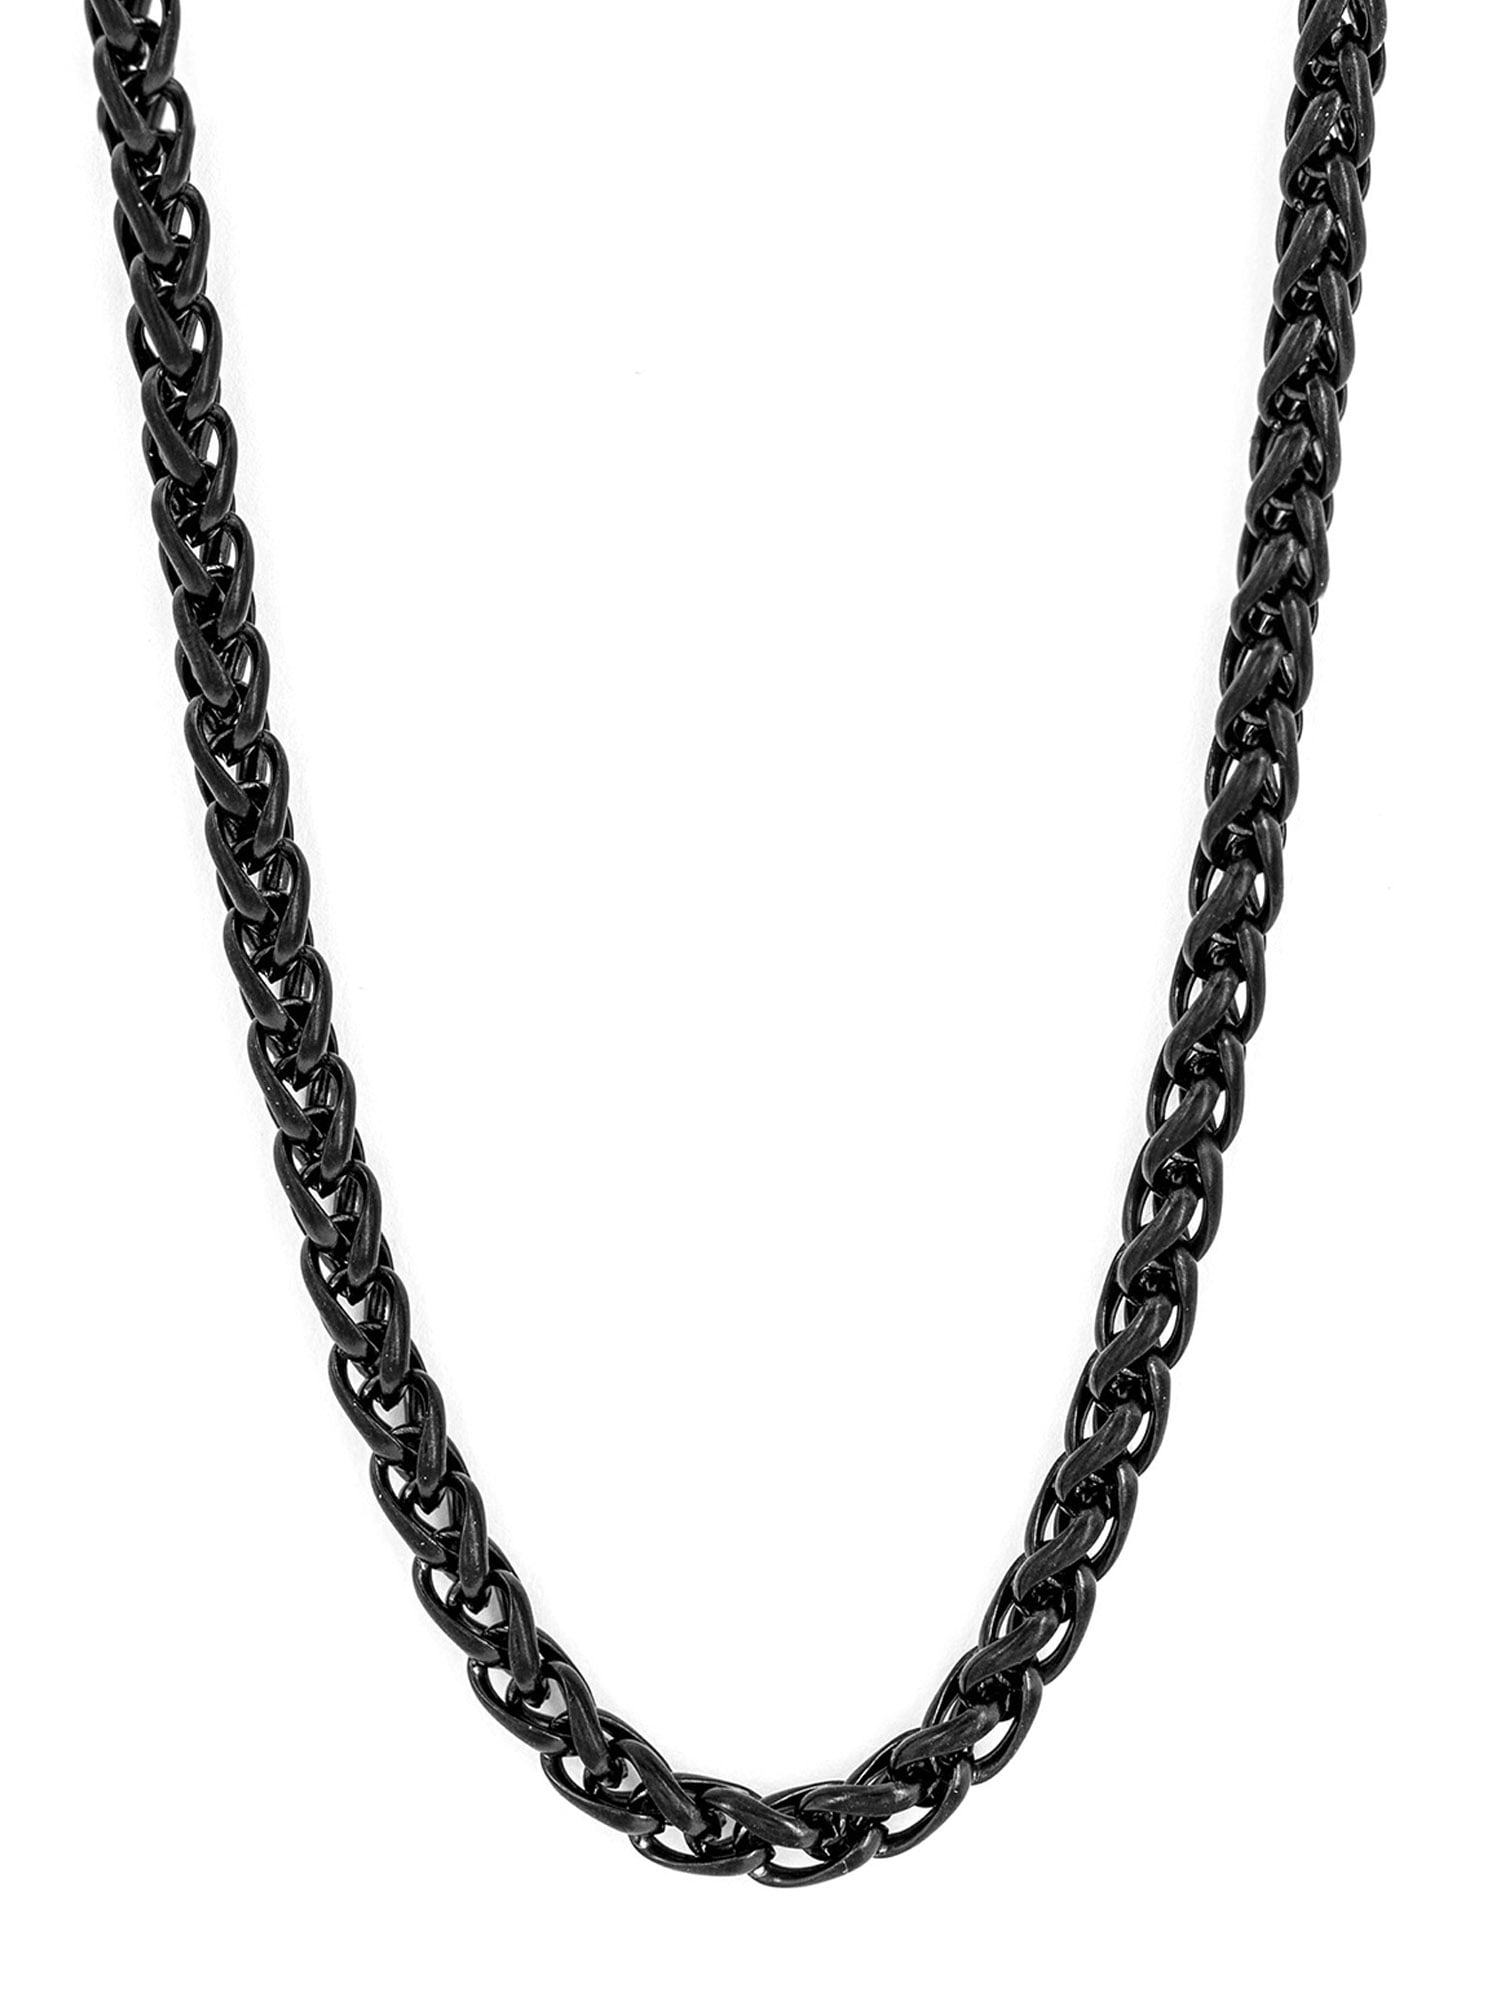 Viking Necklace Stainless Steel Wheat / Spiga Chain | TheNorseWind